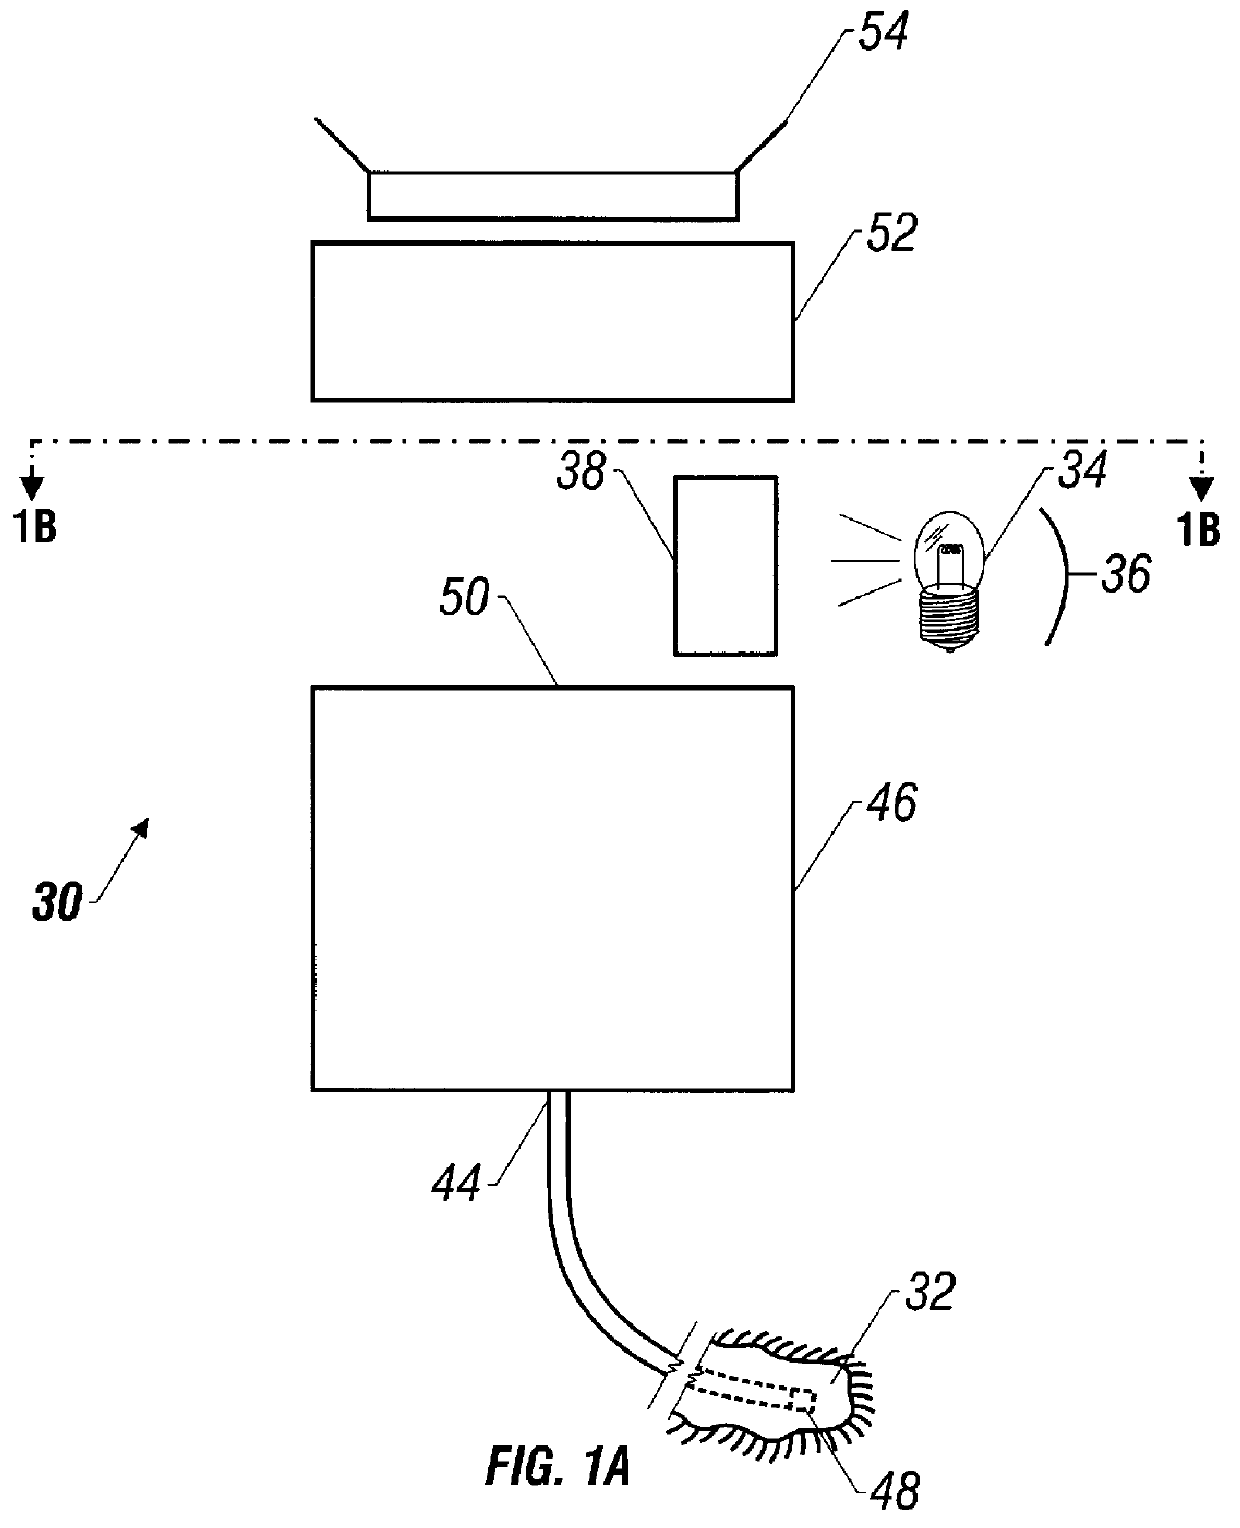 Integrated illumination and imaging system